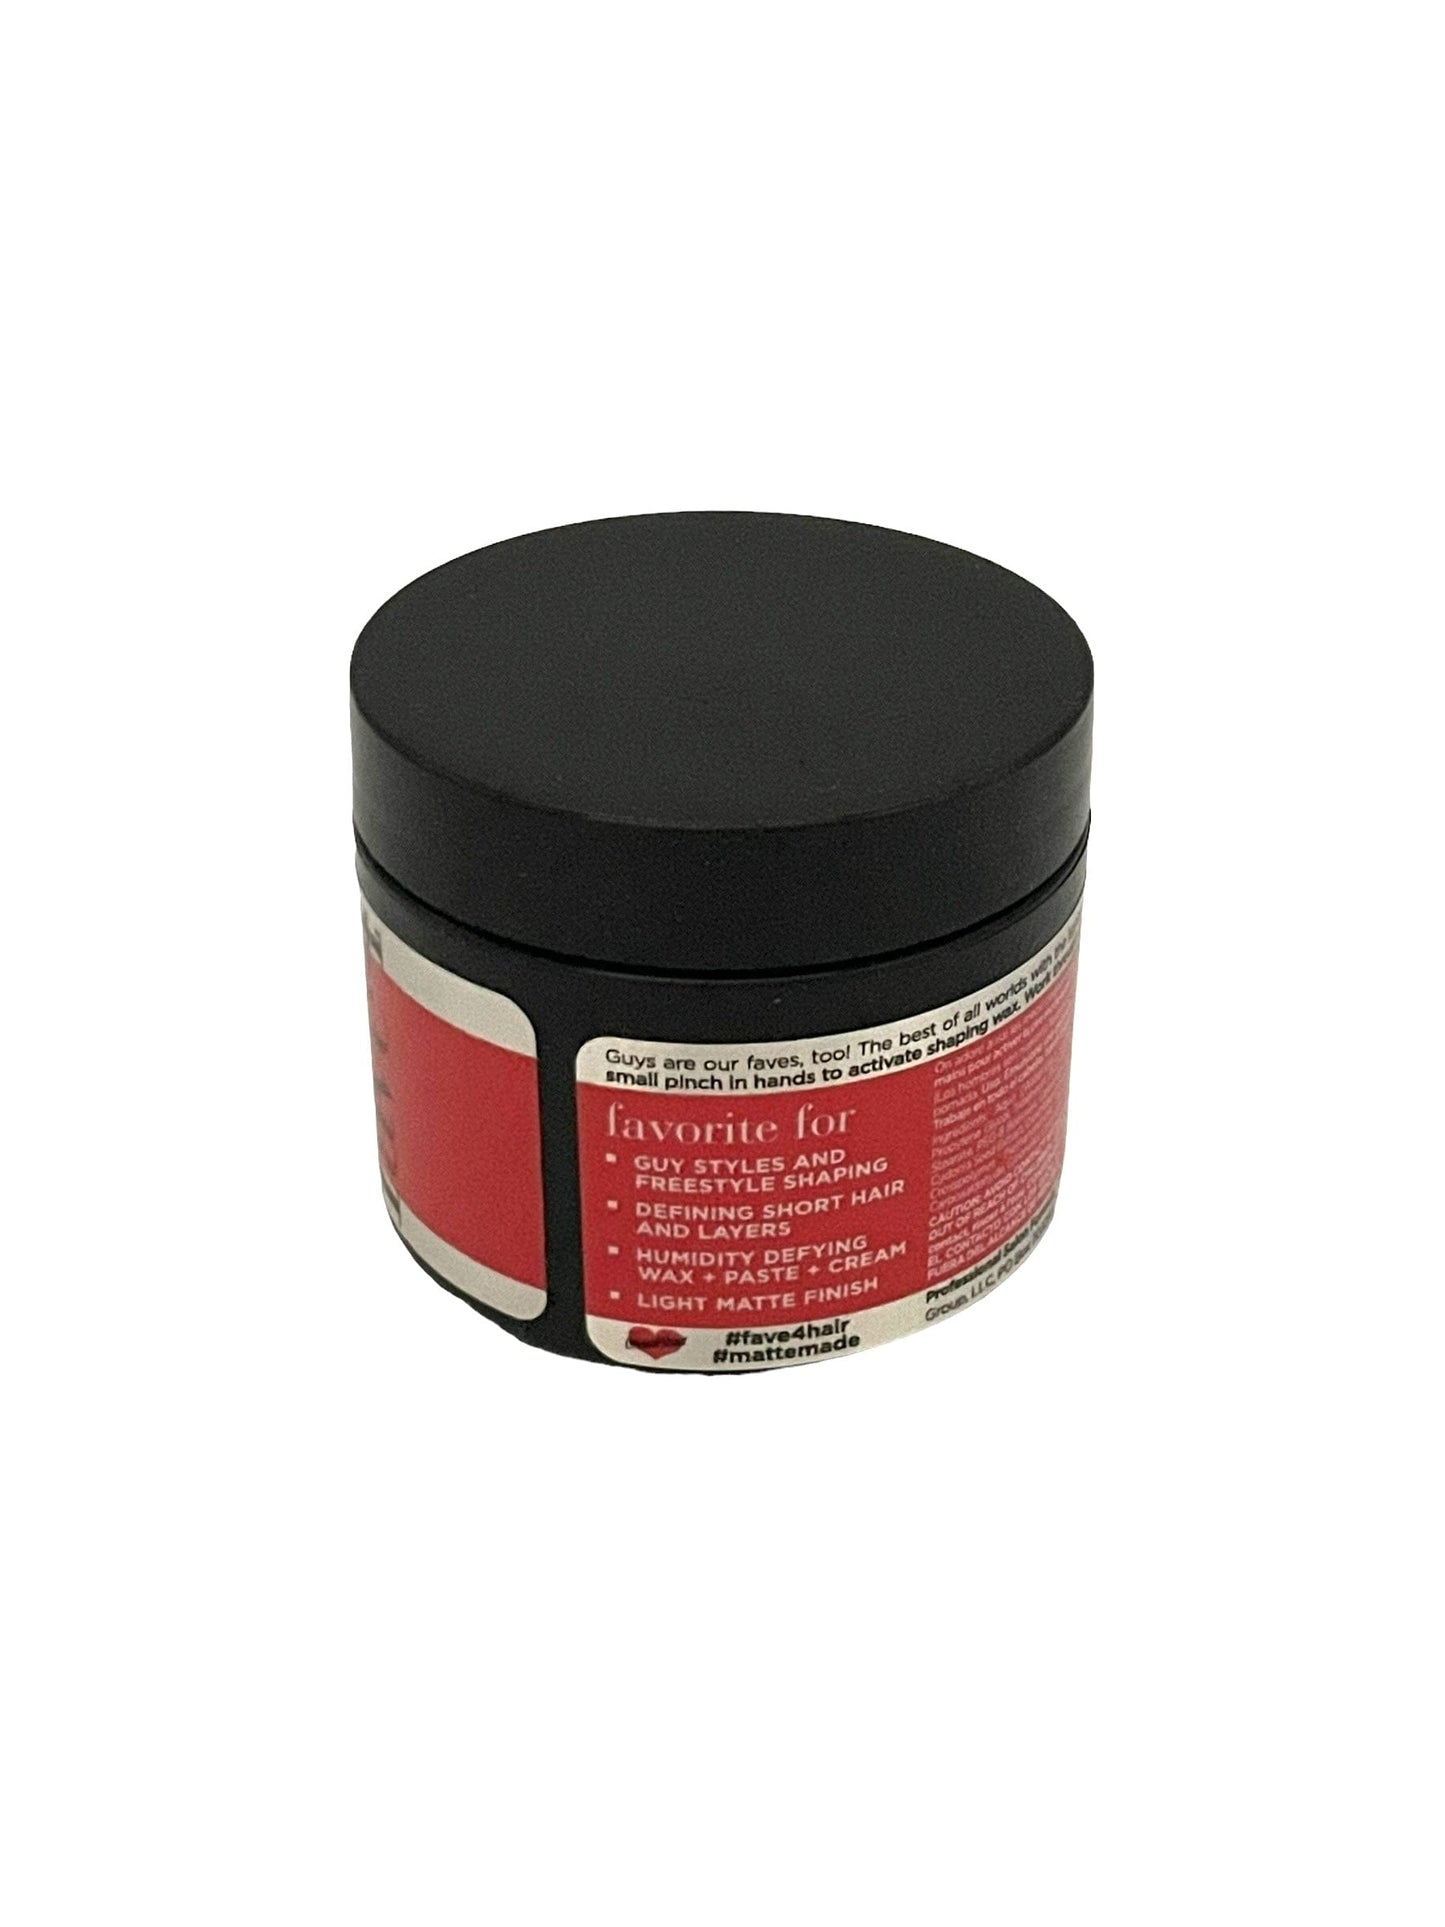 Fave4 Matte Made Hair Shaping Cream 1.7 oz Hair Styling Products